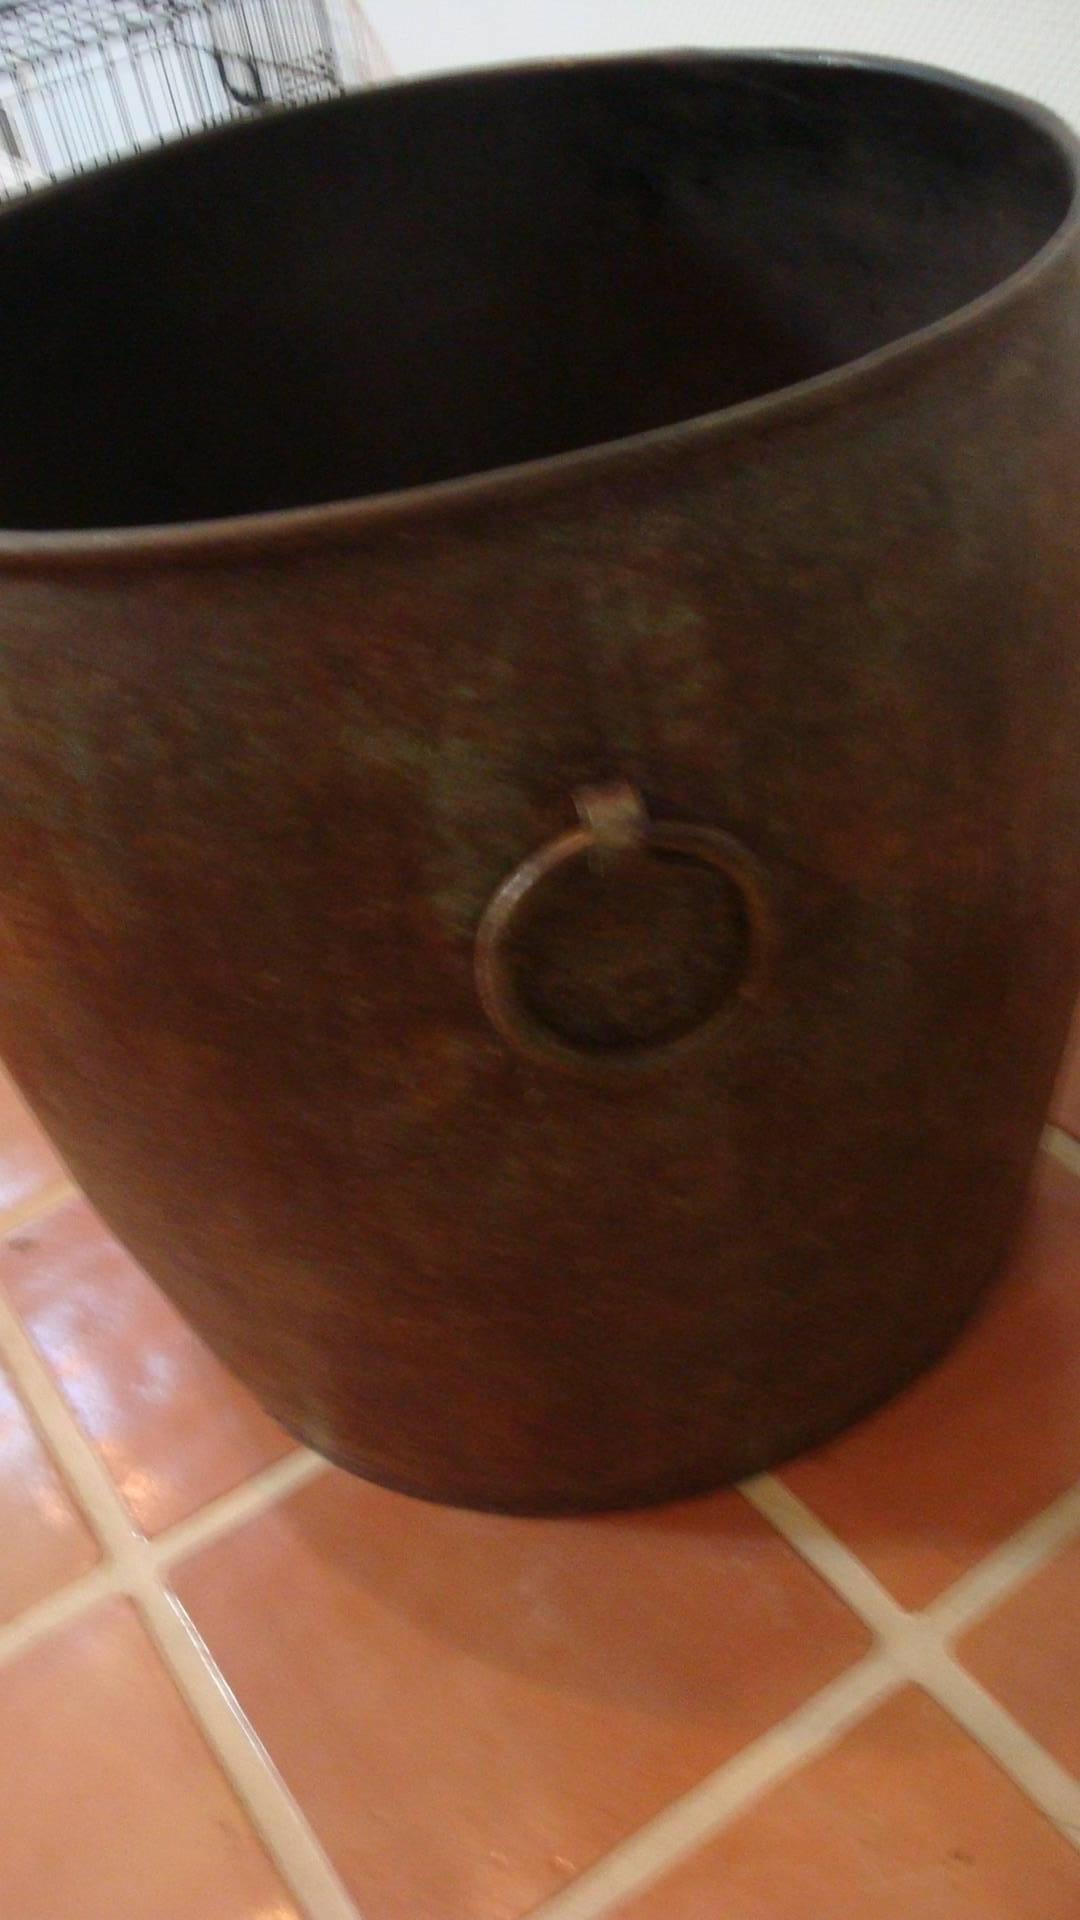 This is an extra large three ringed metal vessel that could be used as planter it was made by Maitland Smith